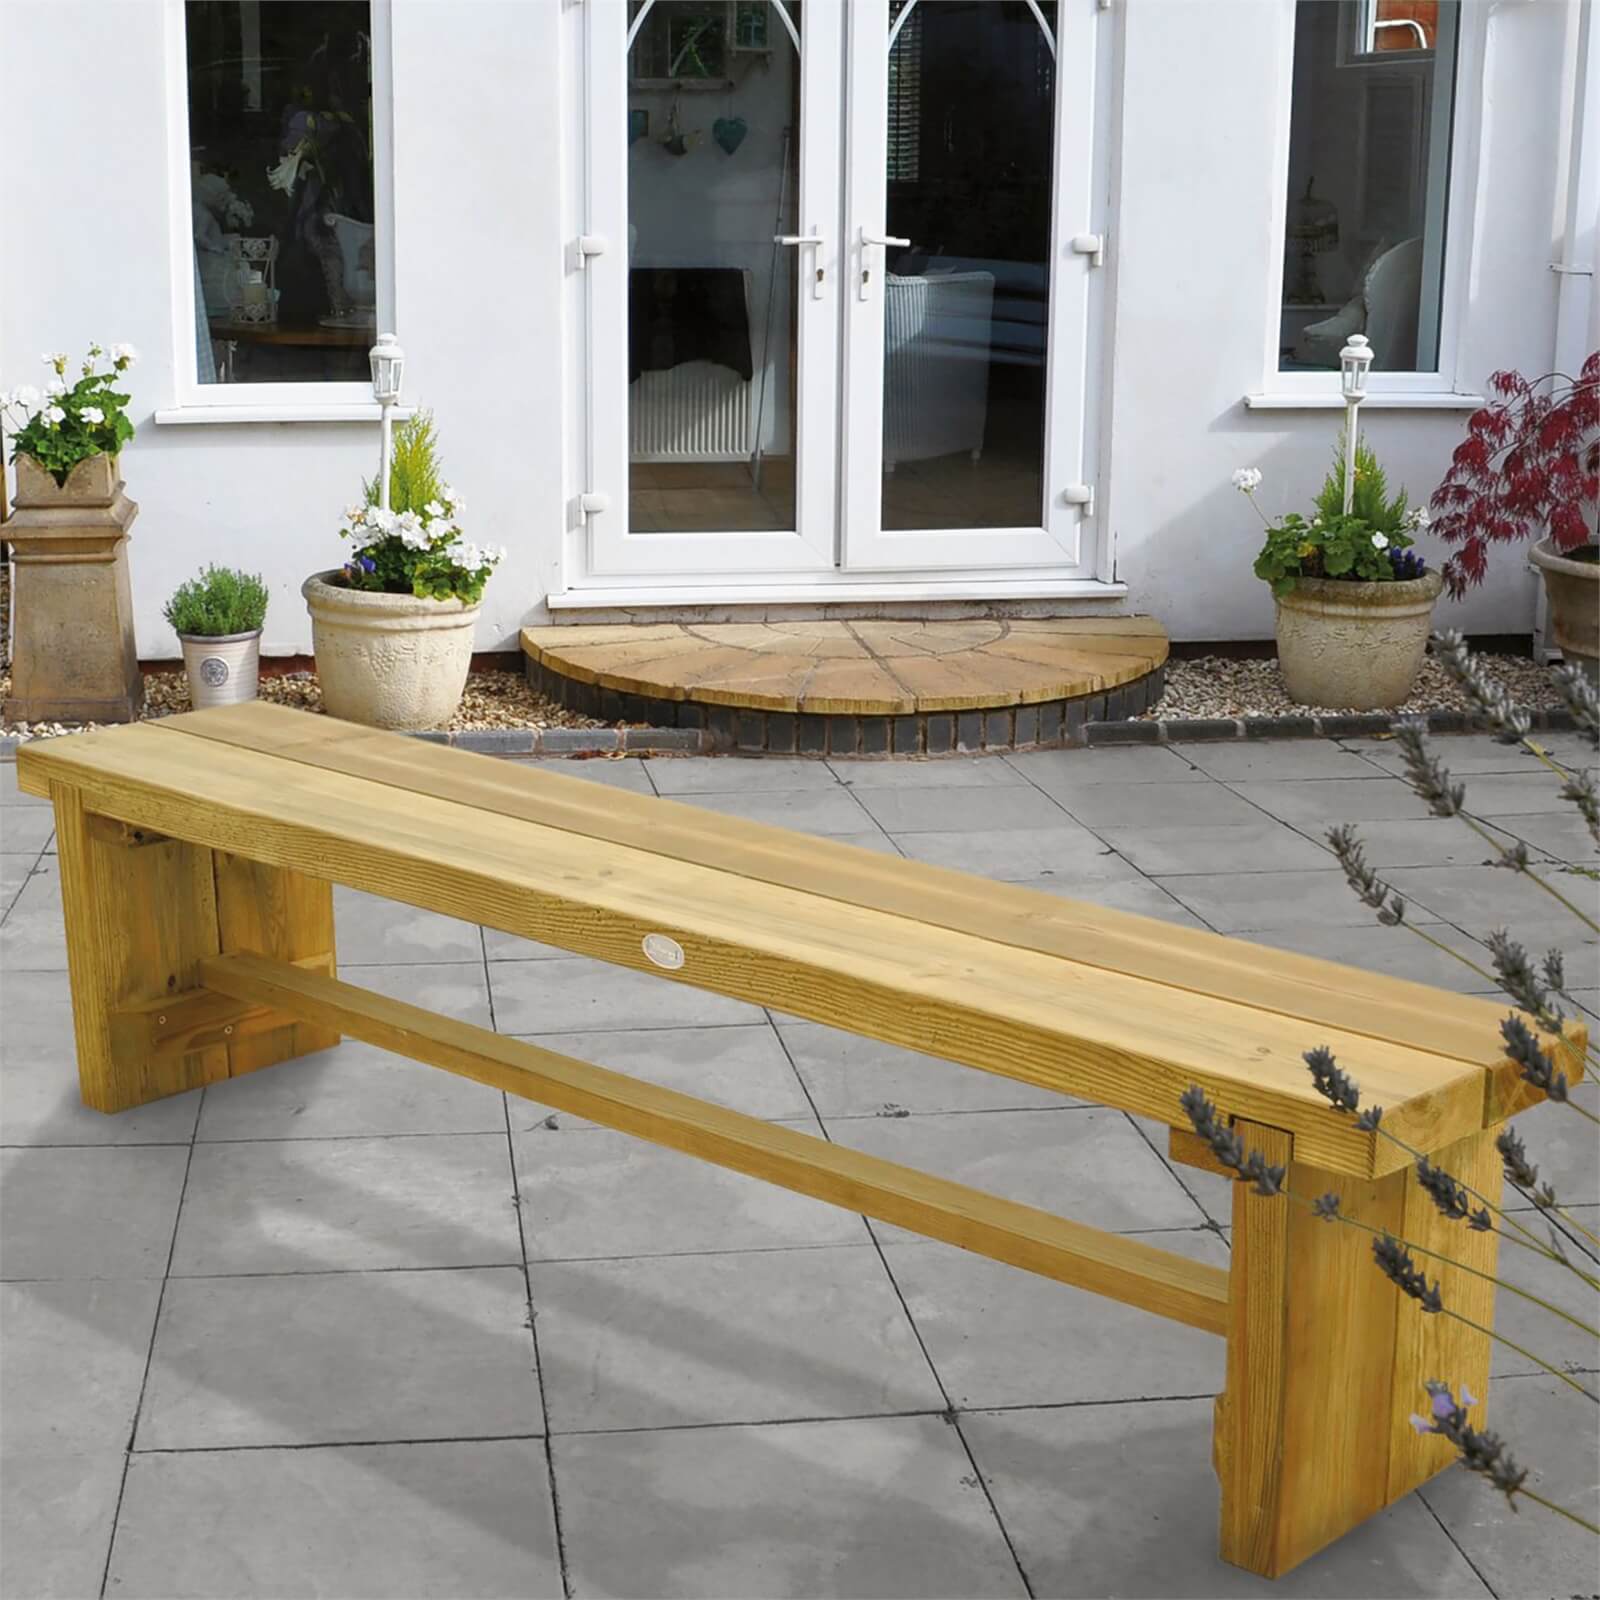 Forest Double Wooden Sleeper Bench - 1.8m